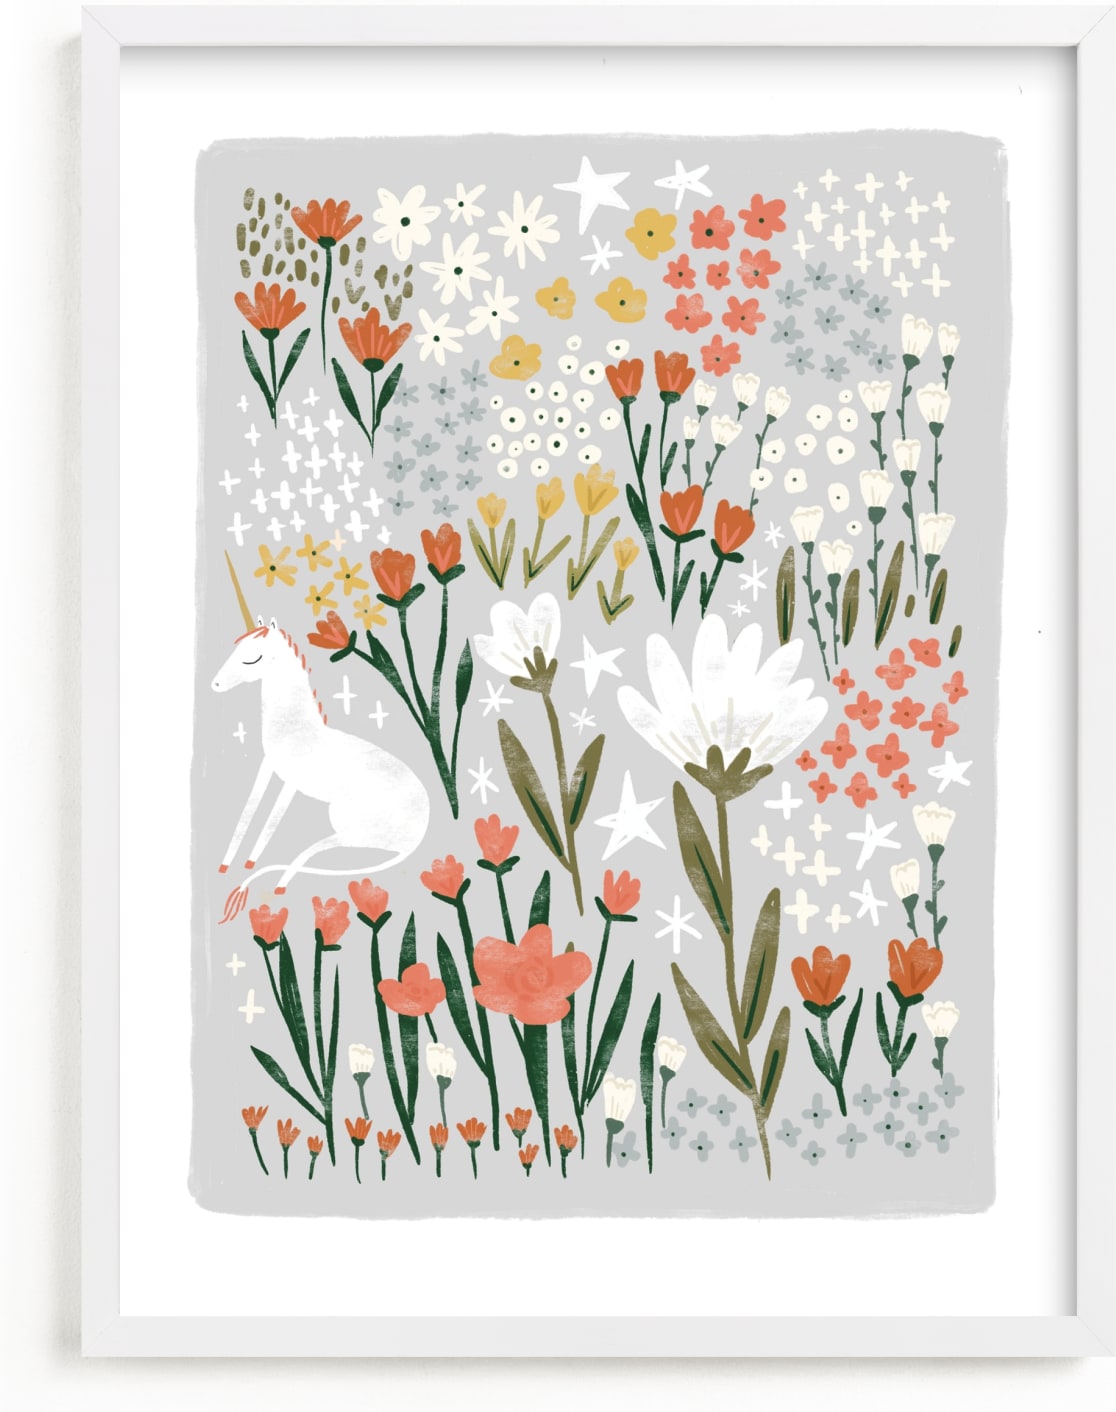 This is a colorful kids wall art by Hannah Williams called Unicorn Garden.